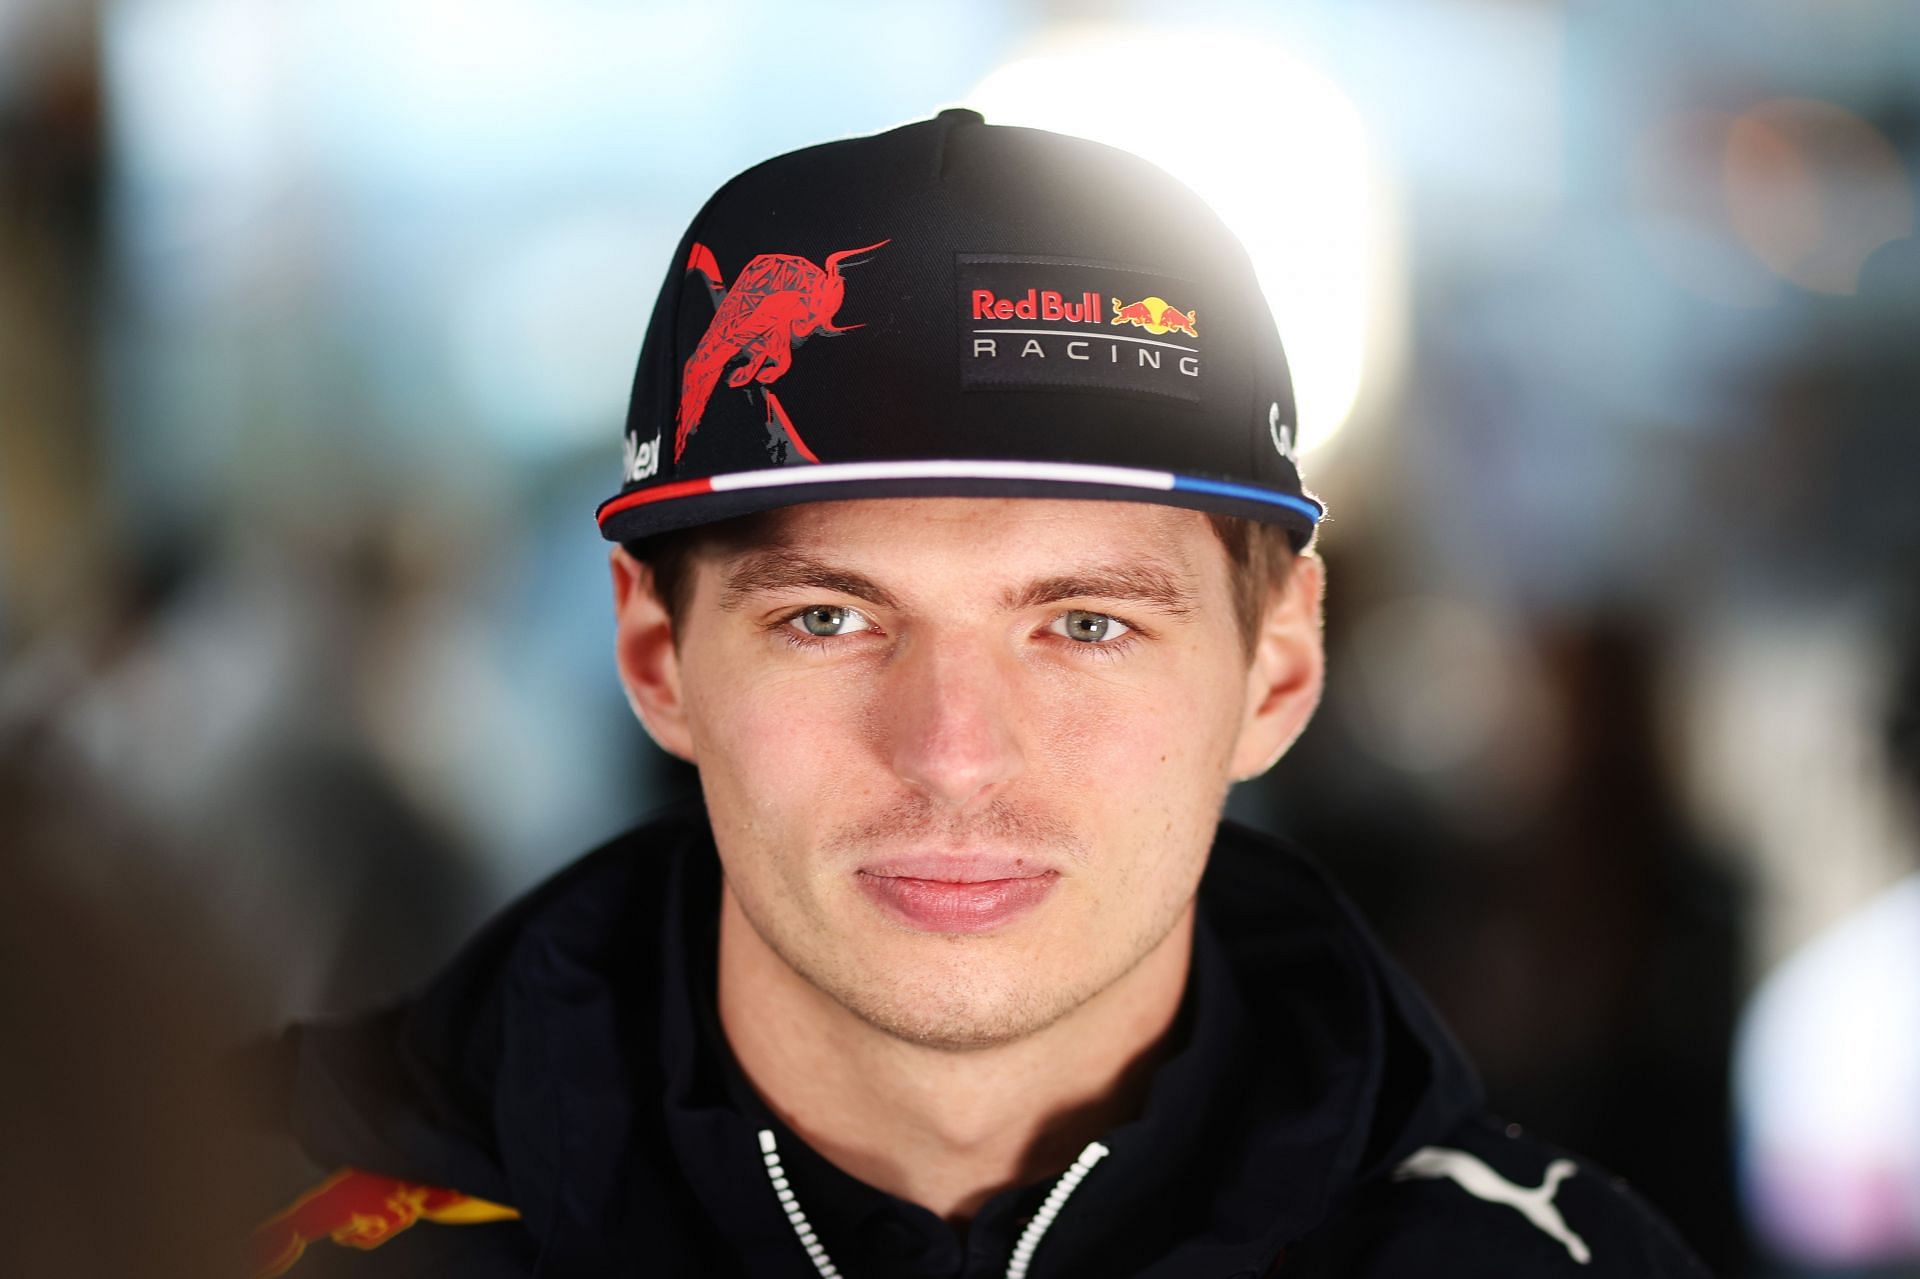 Max Verstappen of the Netherlands and Oracle Red Bull Racing talks to the media in the Paddock before practice ahead of the F1 Grand Prix of Emilia Romagna at Autodromo Enzo e Dino Ferrari on April 22, 2022 (Photo by Peter Fox/Getty Images)